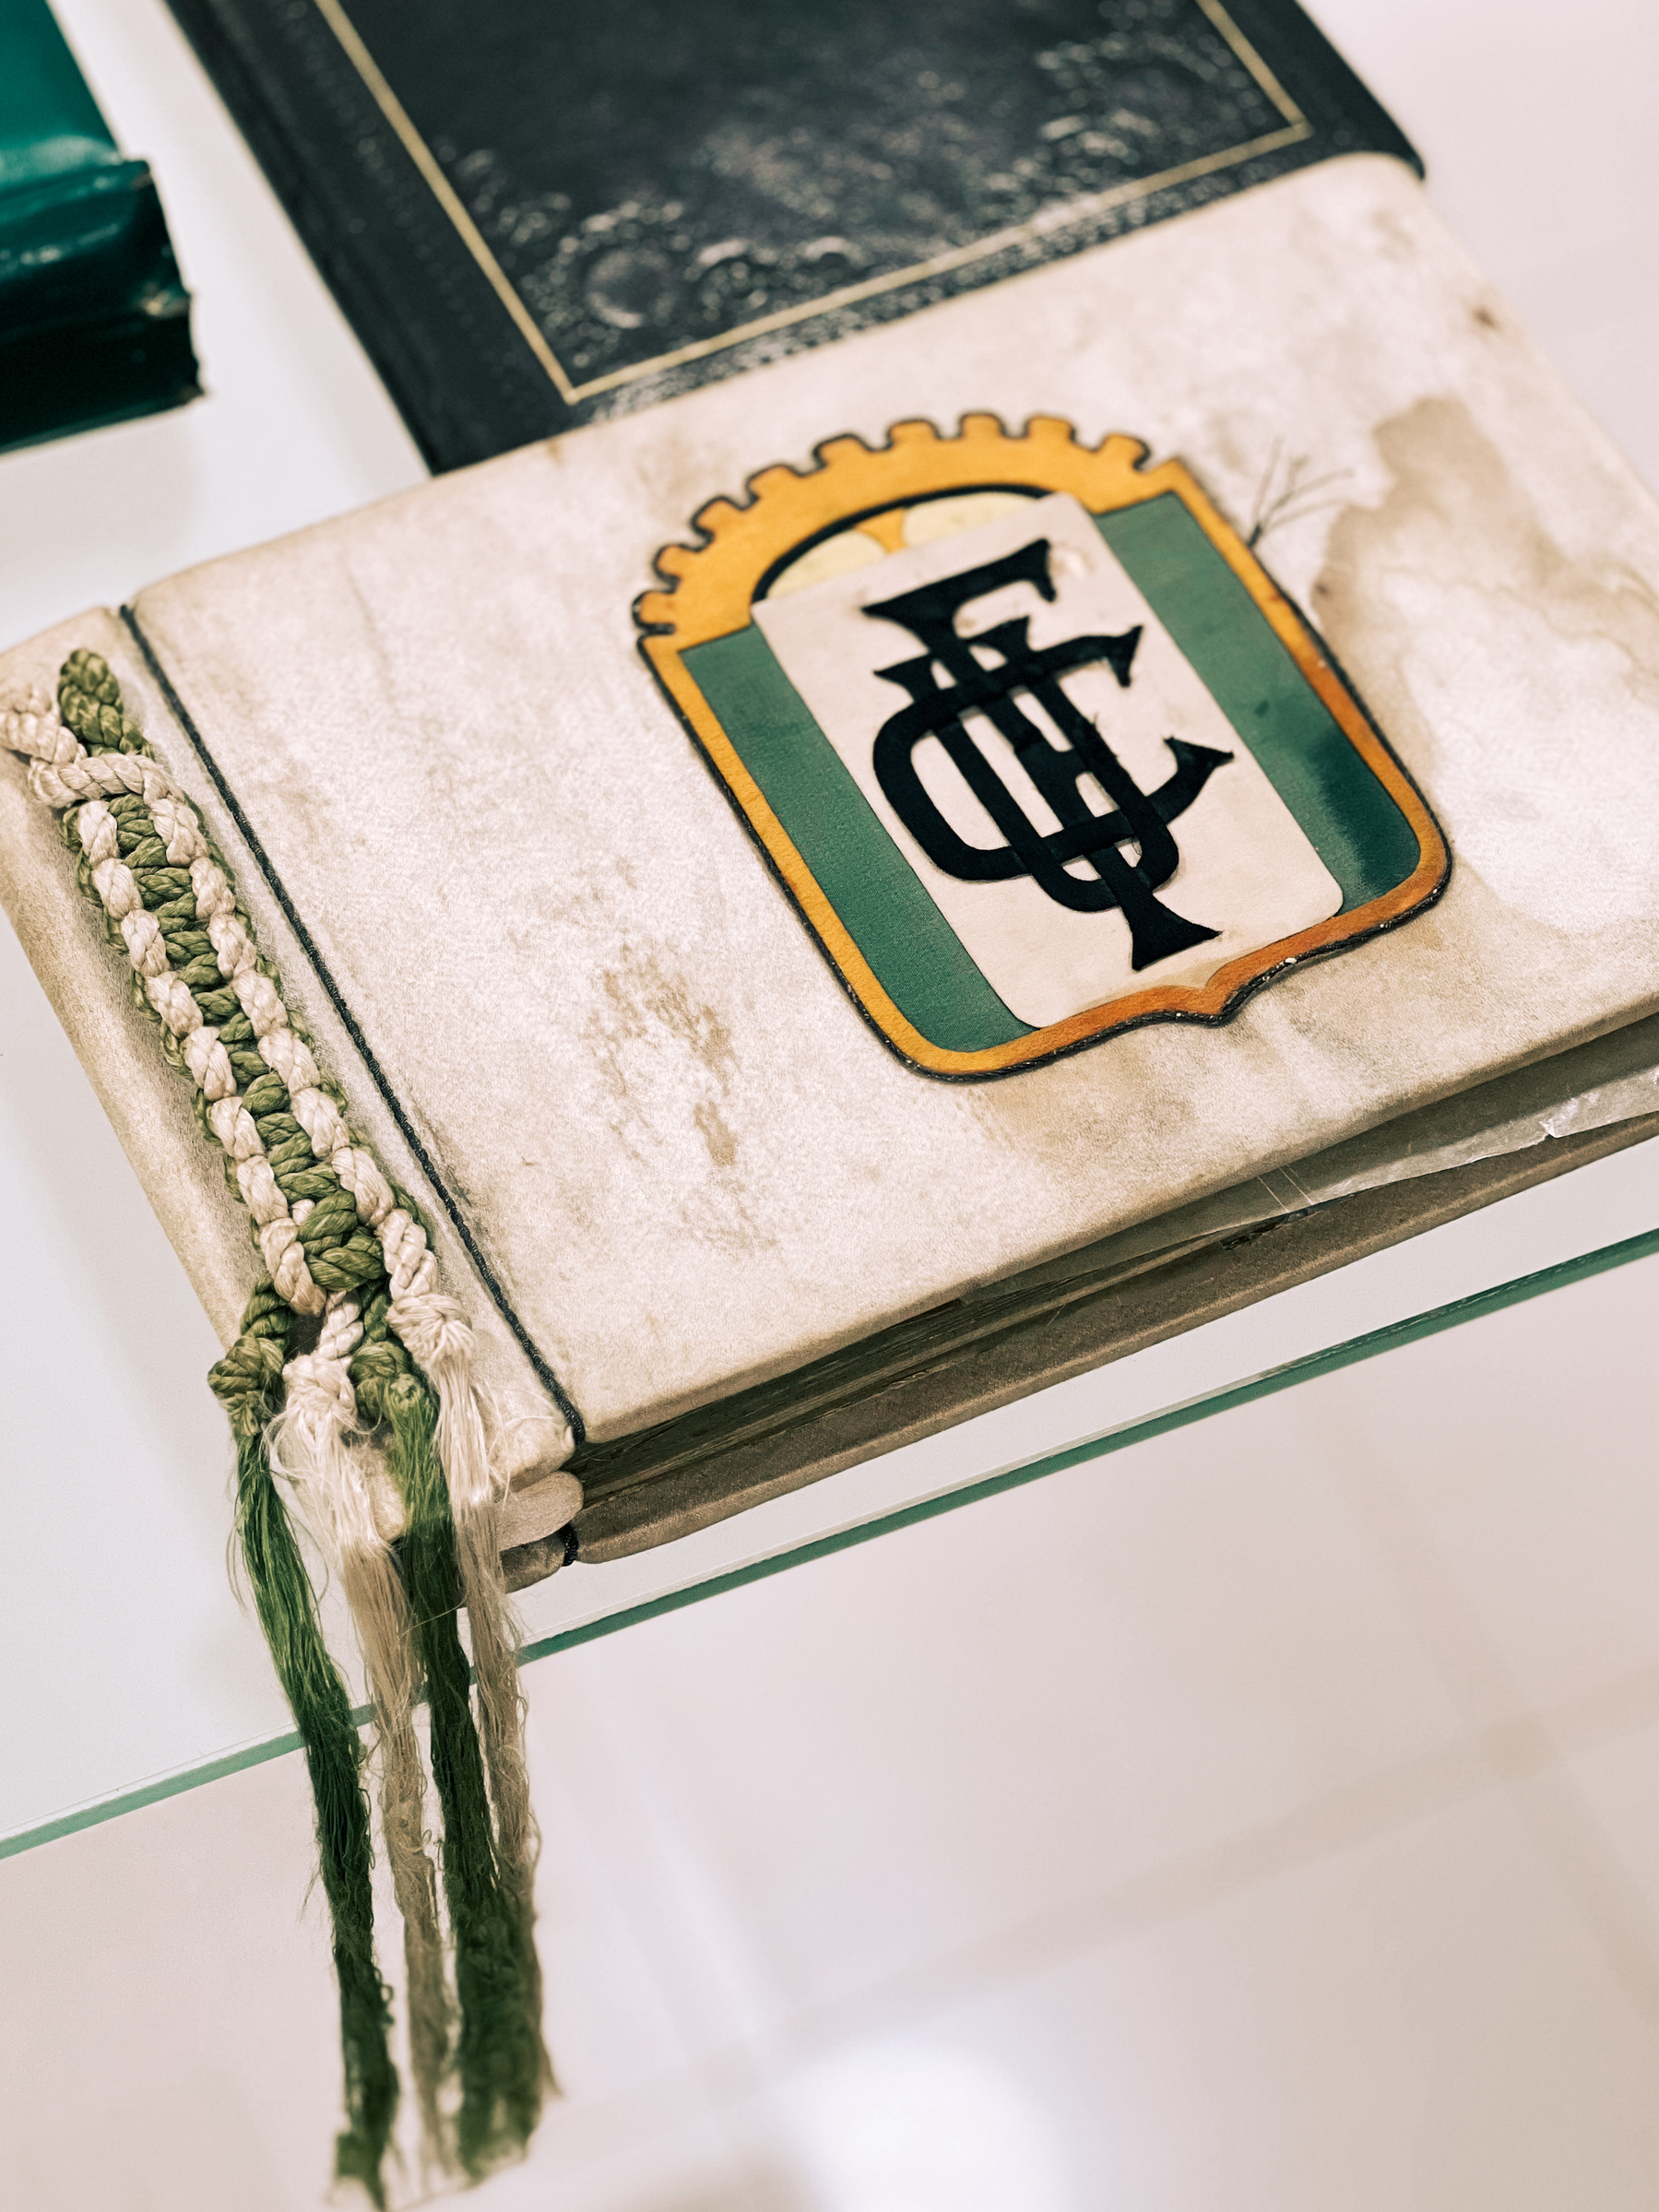 An old book with a tattered cover and a coat of arms featuring a stylized monogram lies on a glass shelf, a braided bookmark extending from its pages.